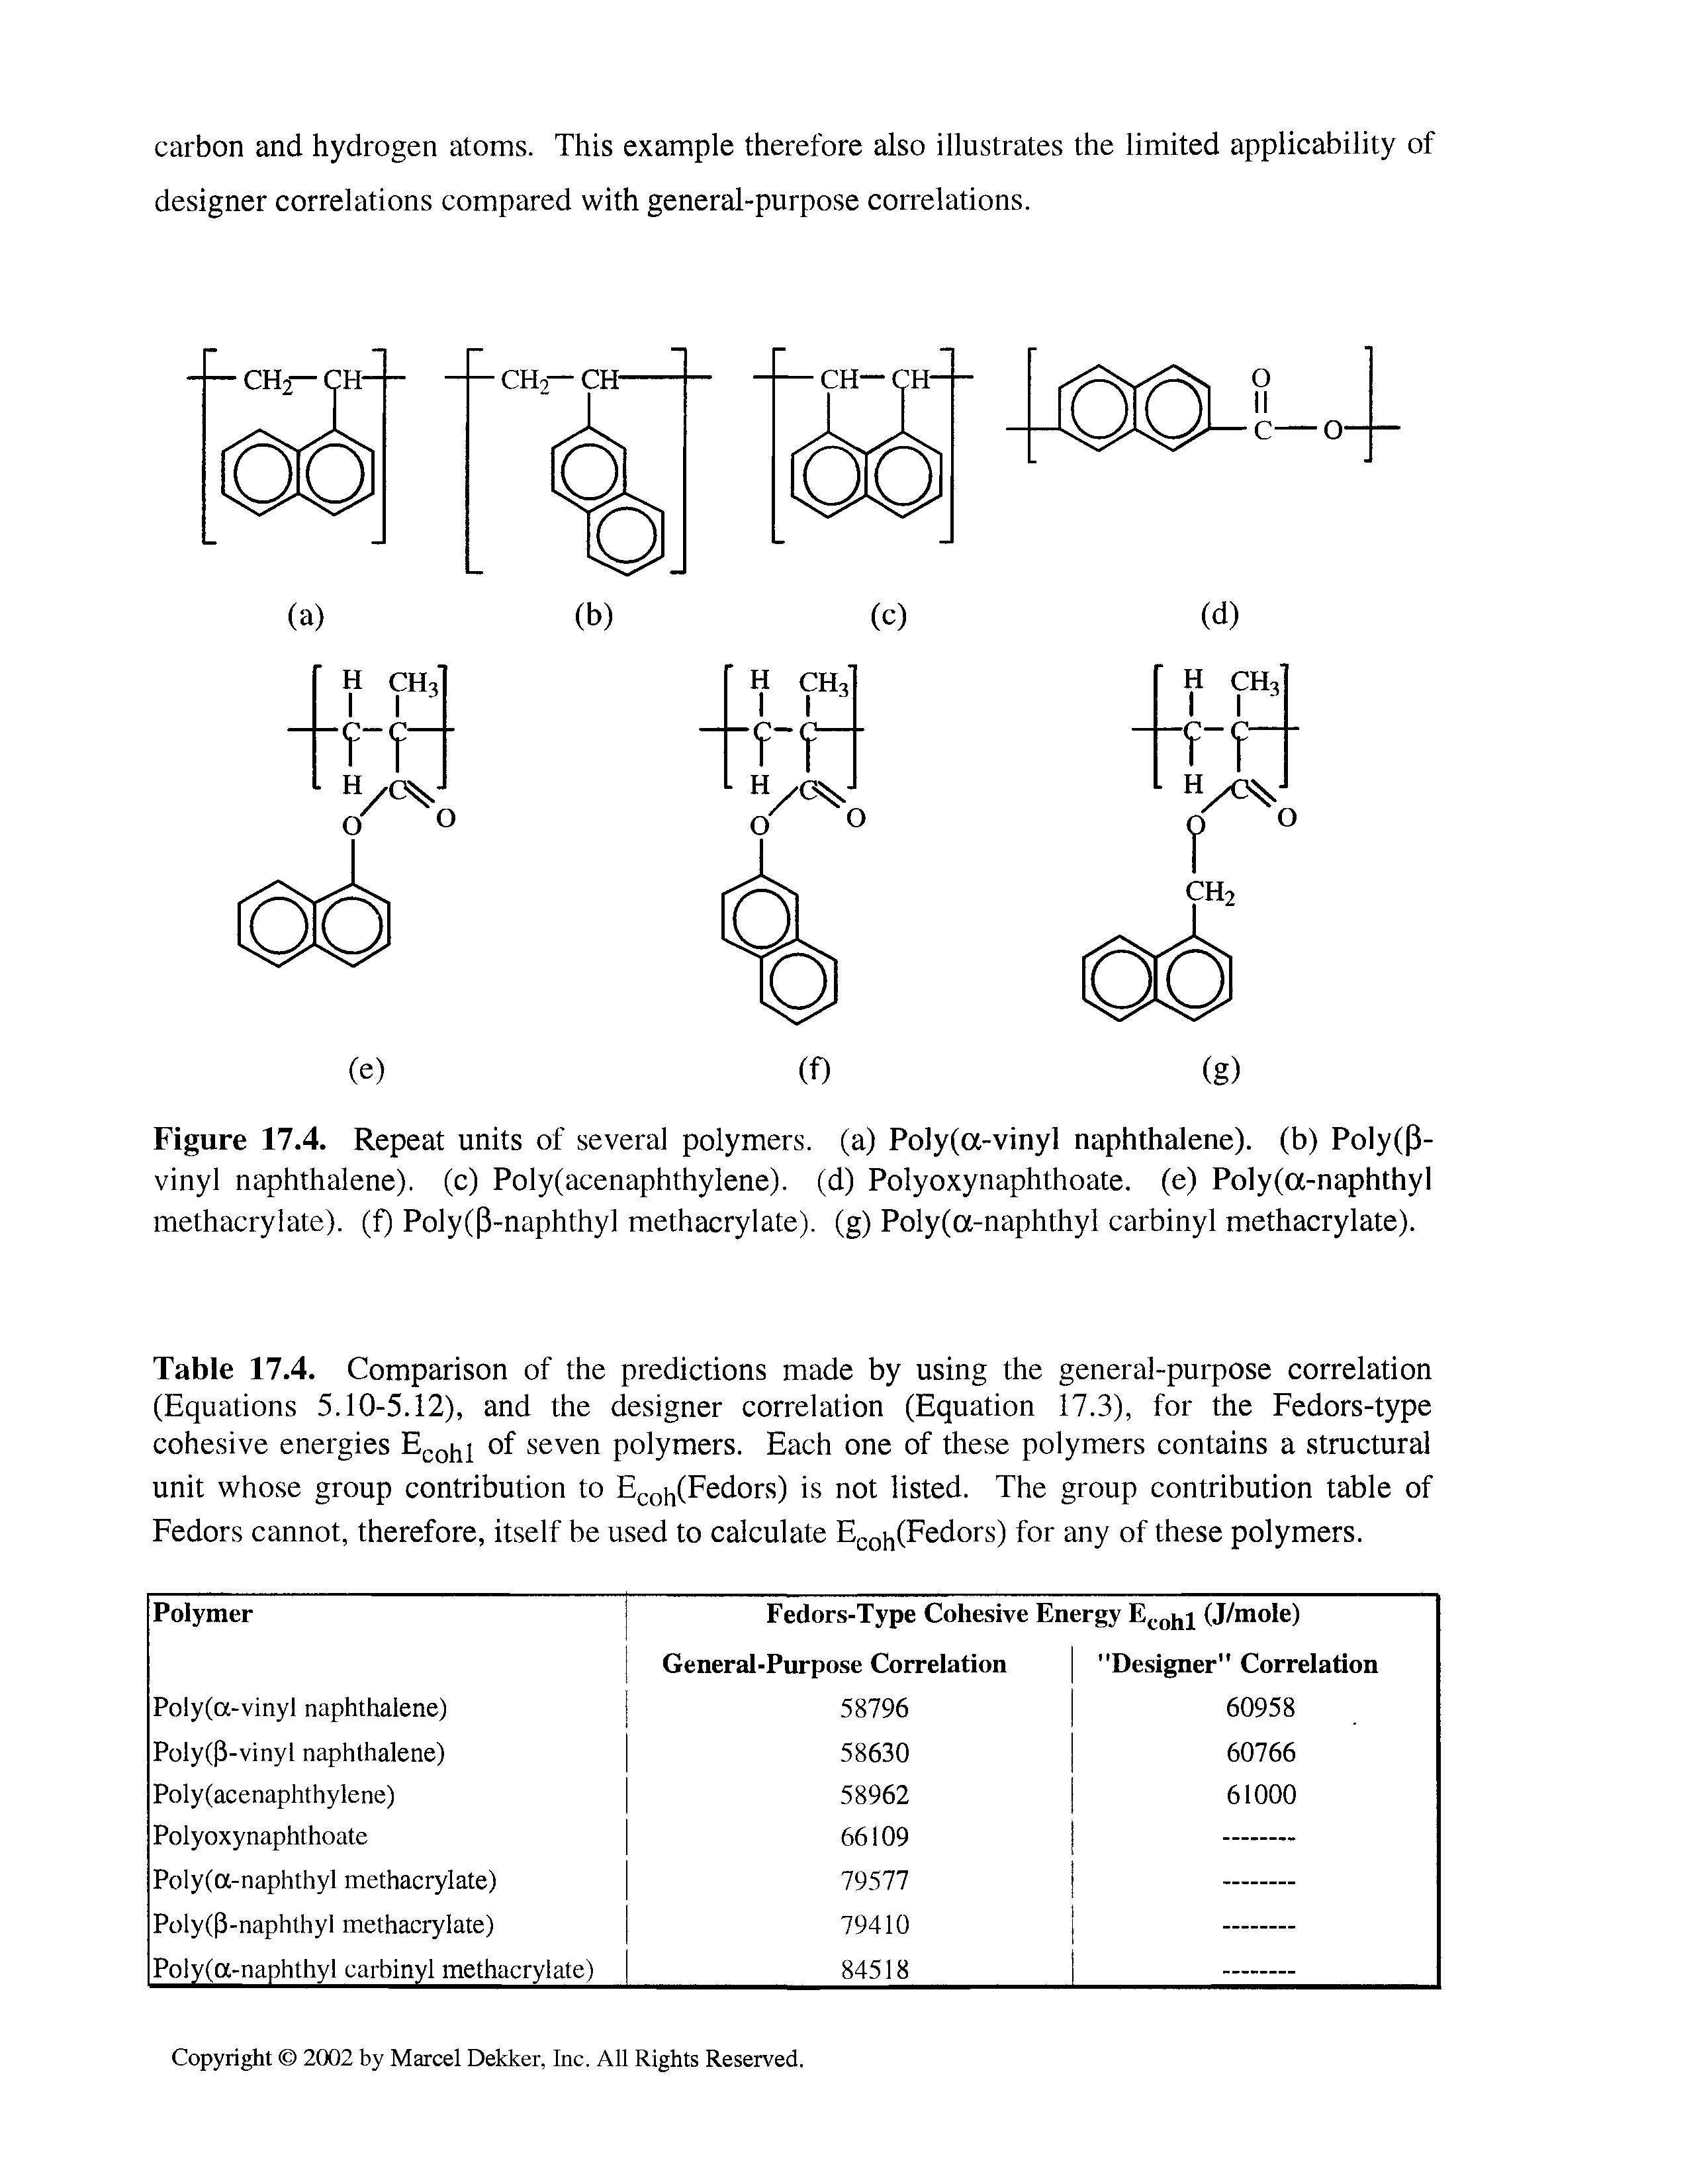 Table 17.4. Comparison of the predictions made by using the general-purpose correlation (Equations 5.10-5.12), and the designer correlation (Equation 17.3), for the Fedors-type cohesive energies Ecohi of seven polymers. Each one of these polymers contains a structural unit whose group contribution to Ecoll(Fedors) is not listed. The group contribution table of Fedors cannot, therefore, itself be used to calculate Ecoh(Fedors) for any of these polymers.